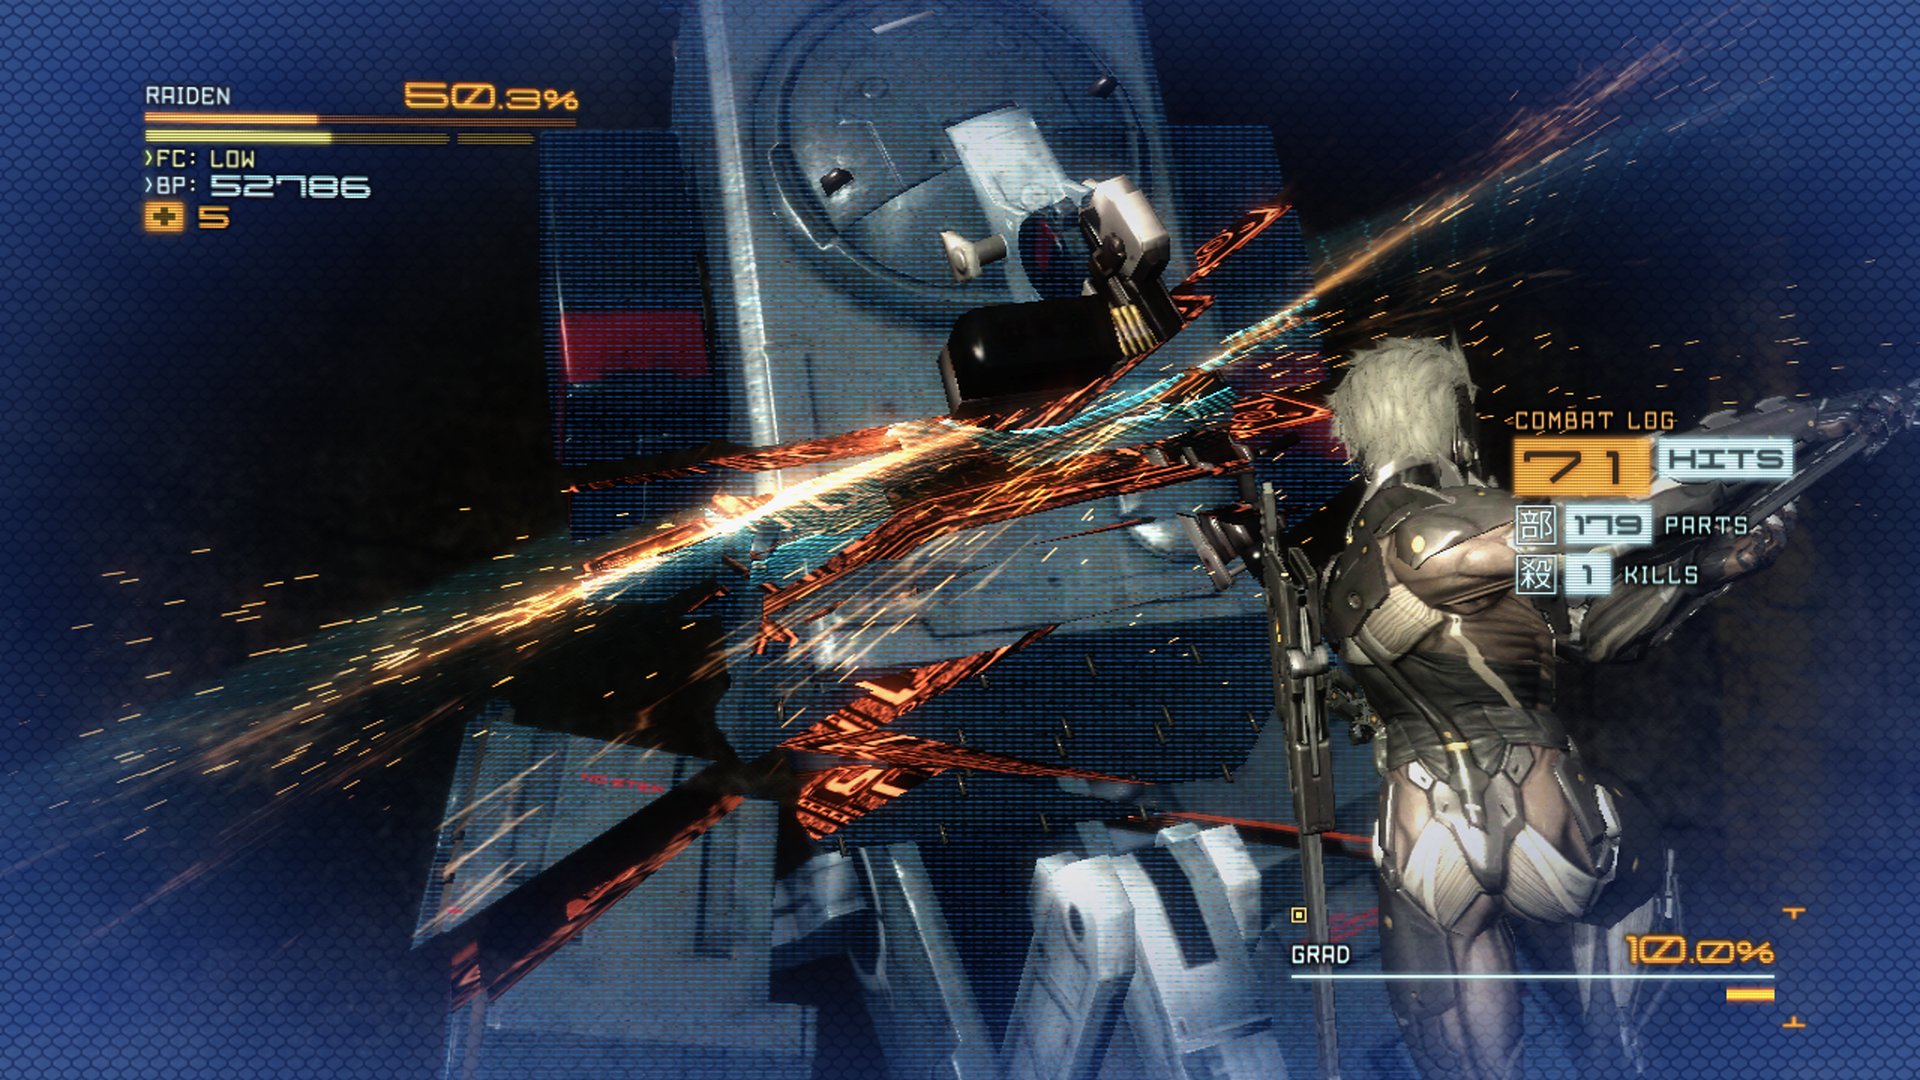 Metal Gear Rising: Revengeance (for PC) Review